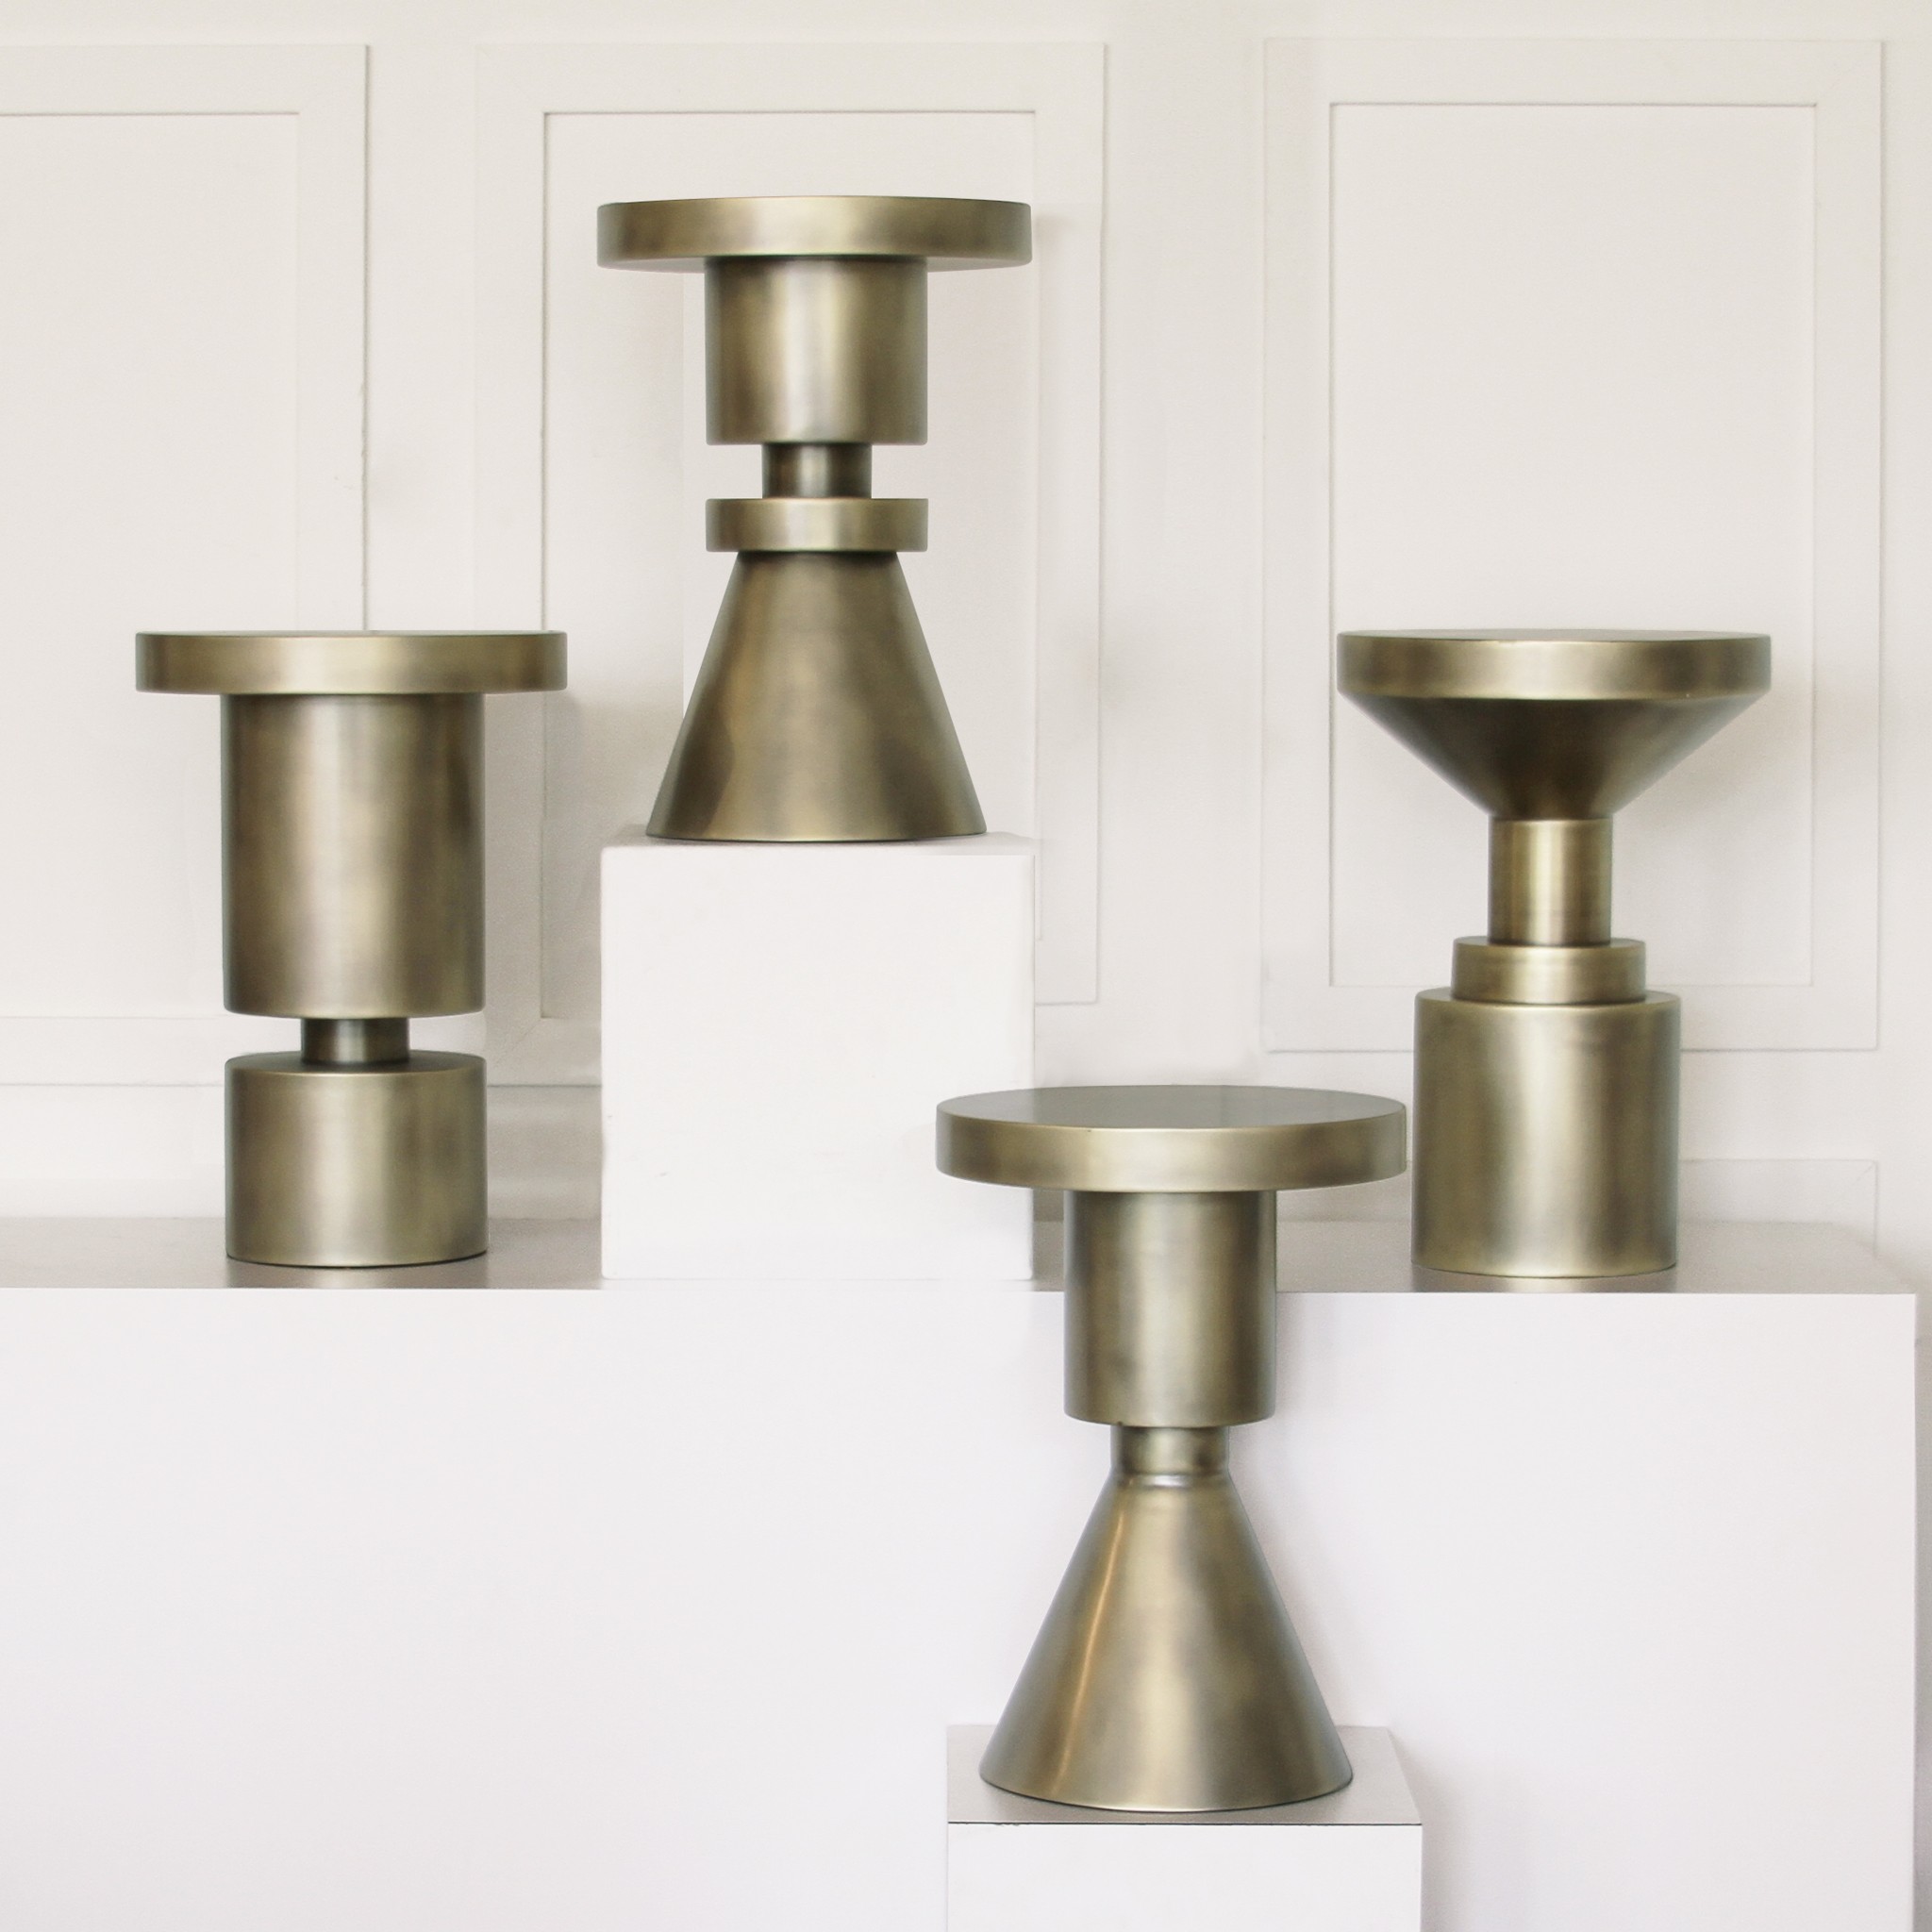 a group of three metal vases sitting on top of a white shelf